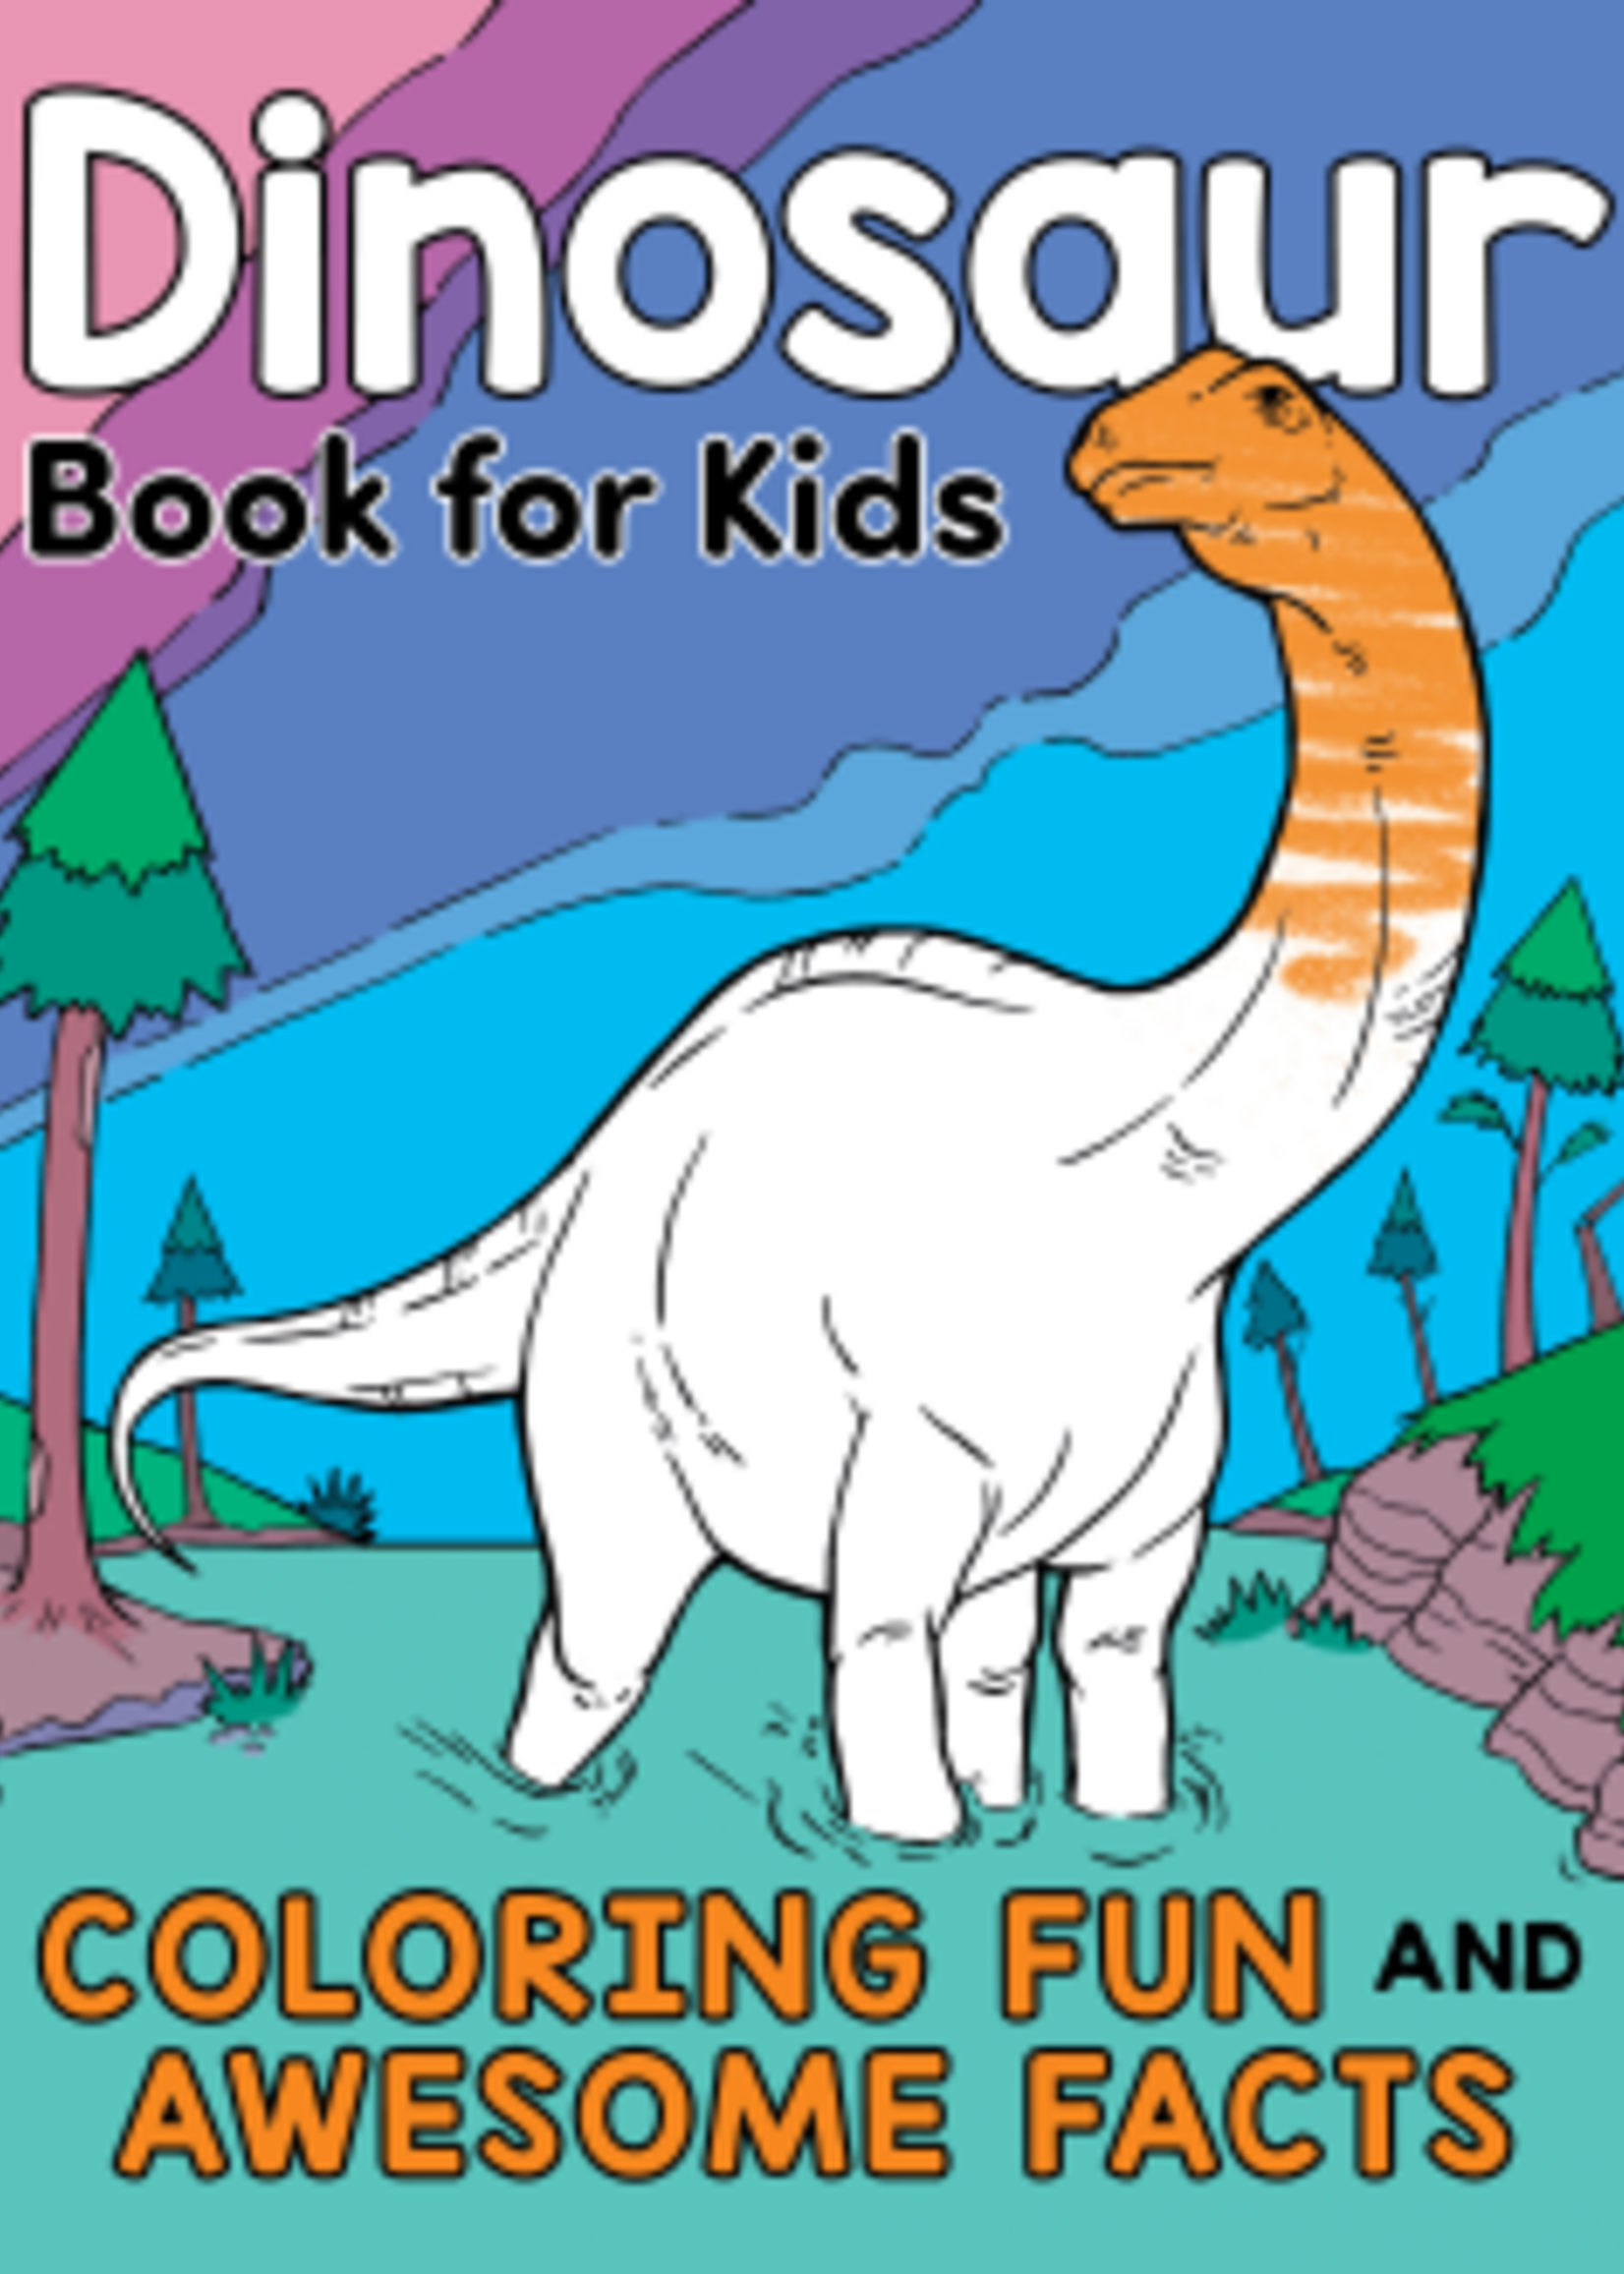 Dinosaur Book for Kids: Coloring Fun and Awesome Facts about the Prehistoric Animals That Ruled the World! by Katie Henries-Meisner